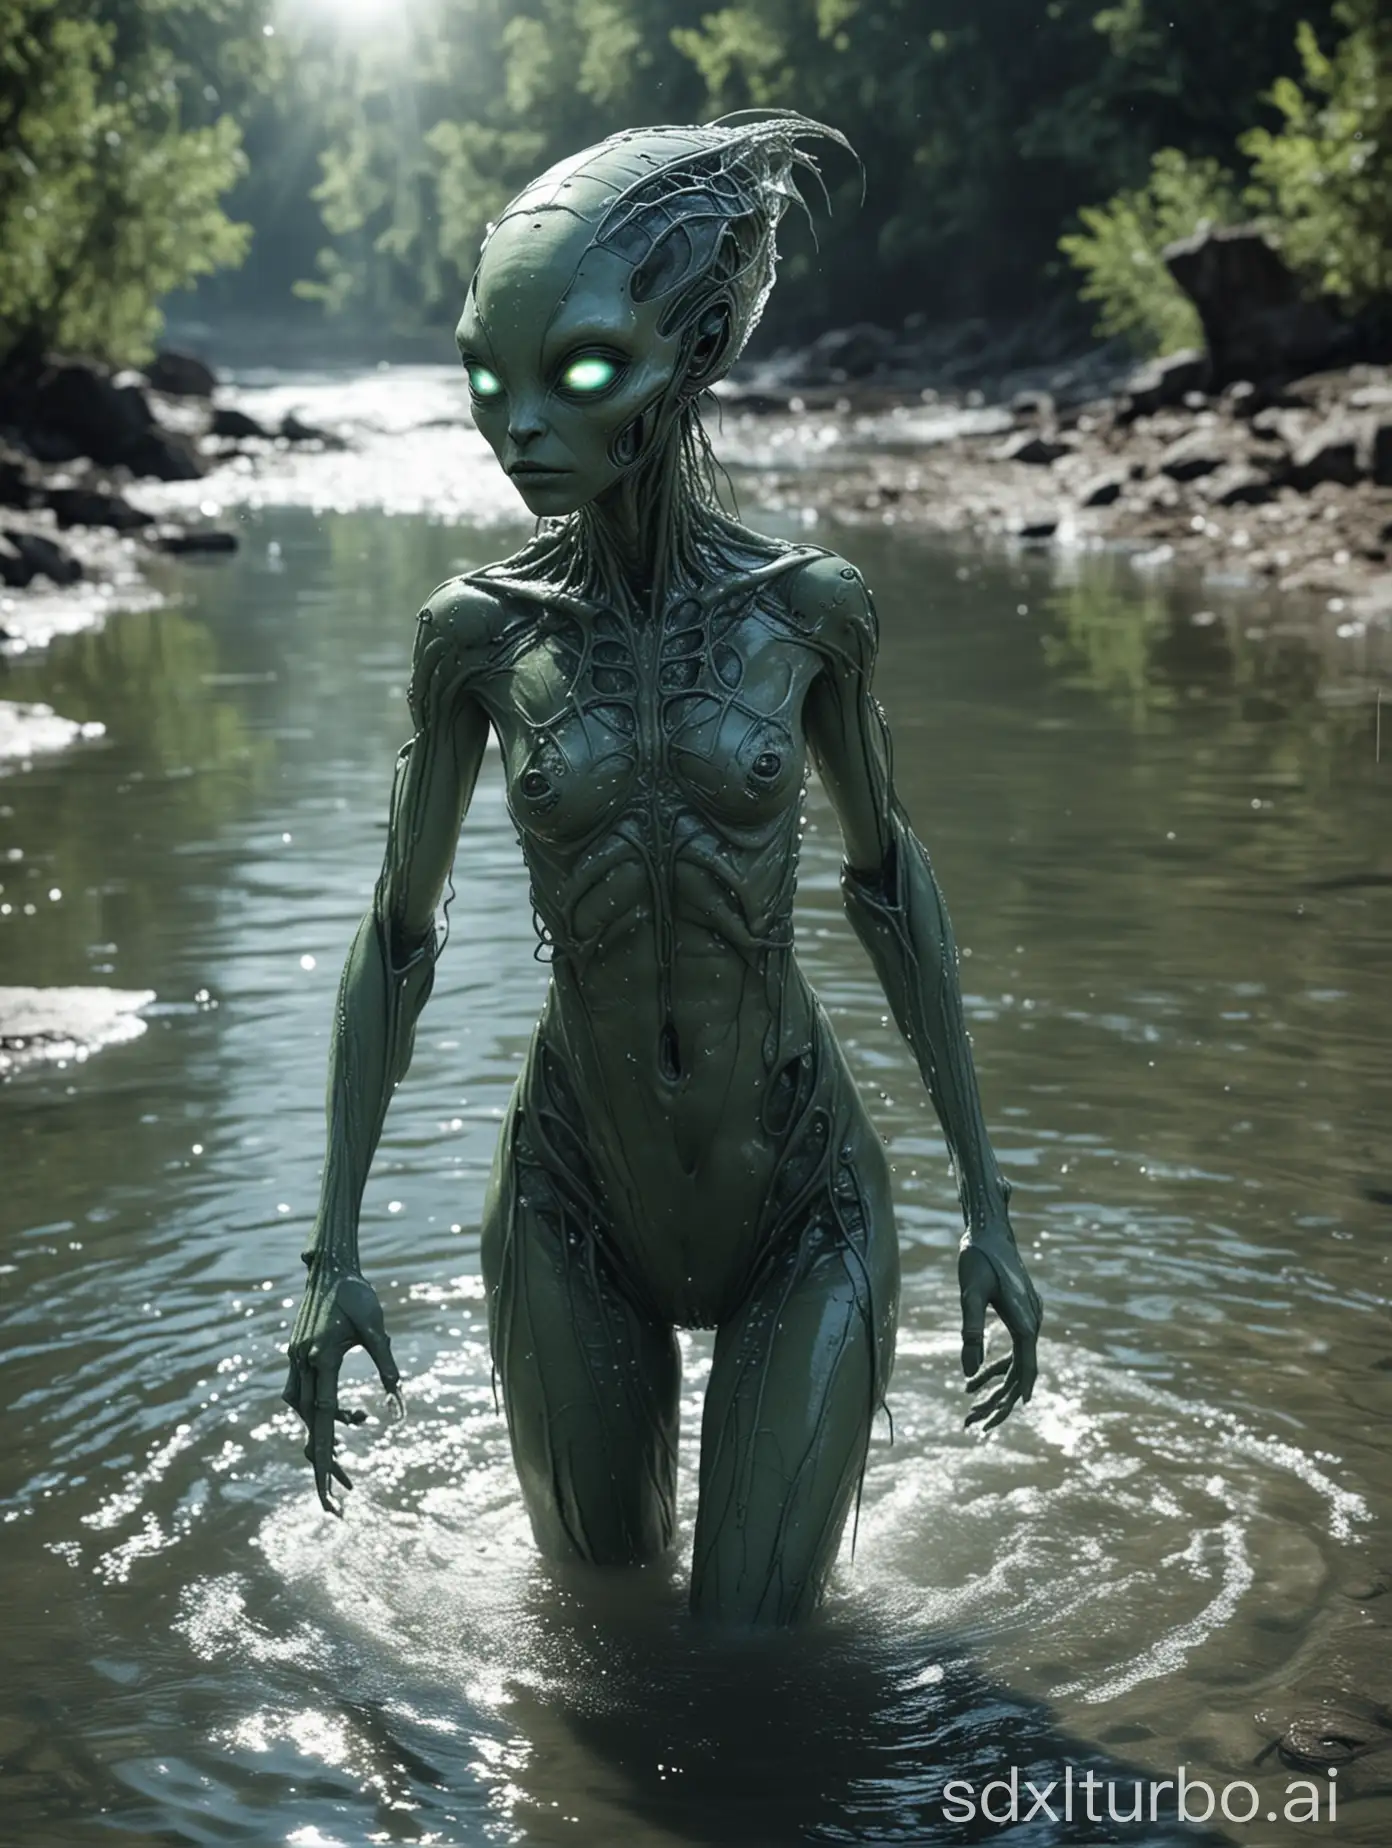 humanoid insect-like alien girl bathing in extraterrestrial river